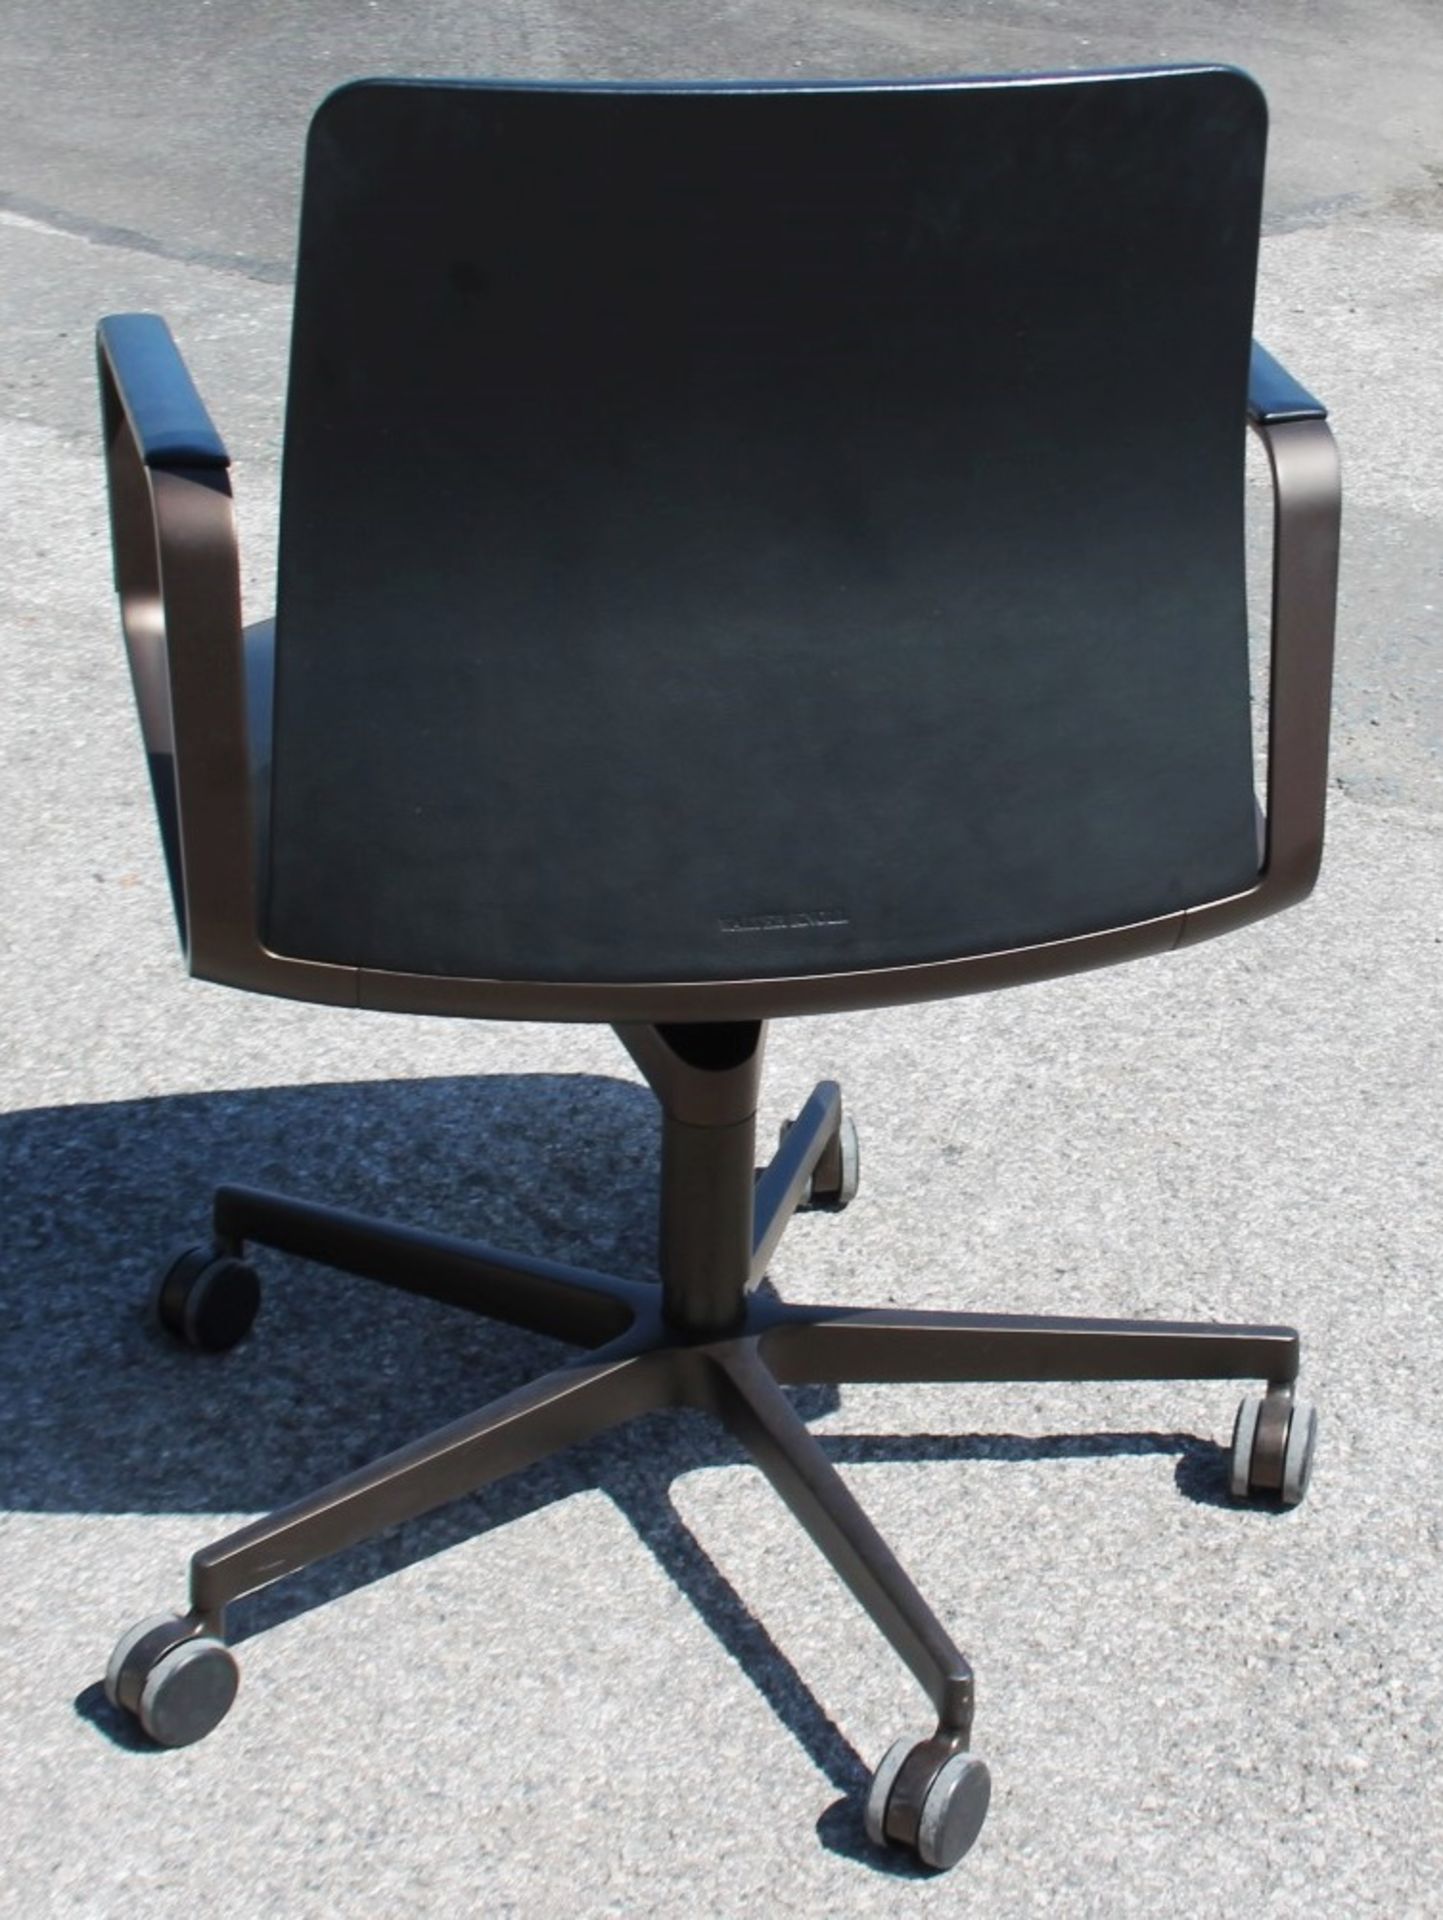 1 x WALTER KNOLL 'Leadchair' Executive Meeting Chair In Genuine Leather - Original RRP £4,250 - - Image 8 of 8